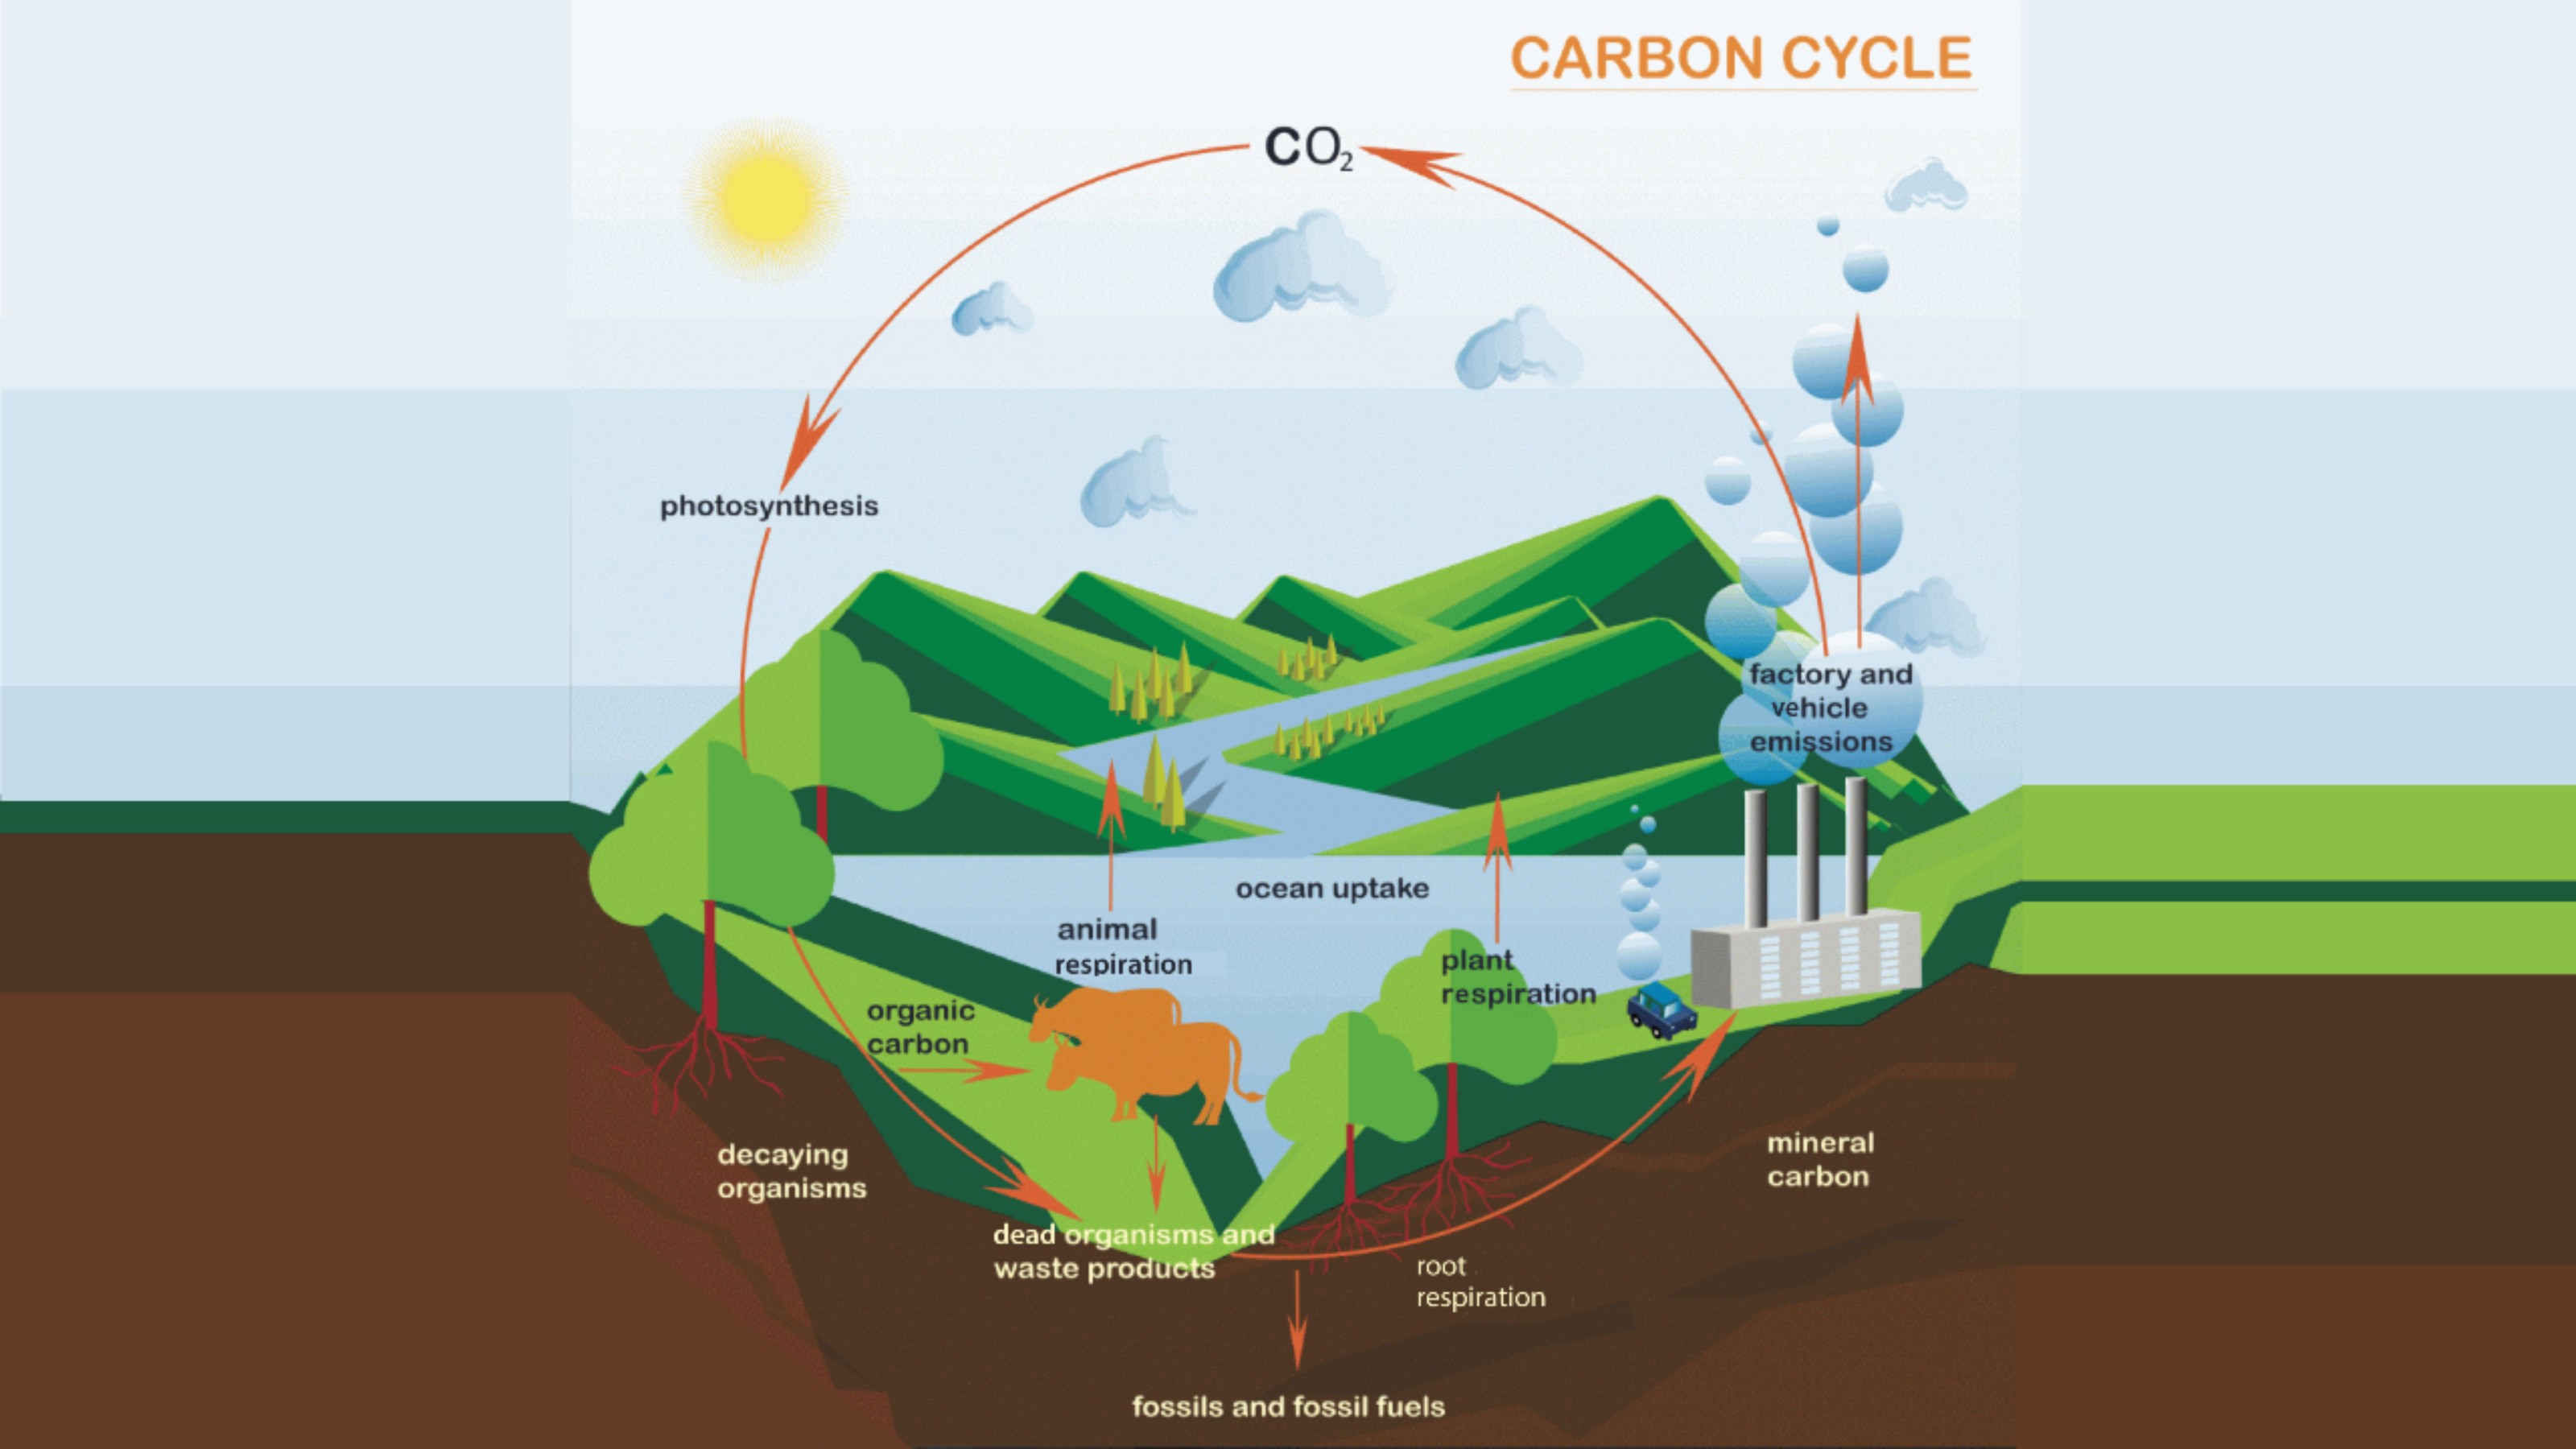 Diagram of carbon cycle showing carbon in solid and gaseous forms